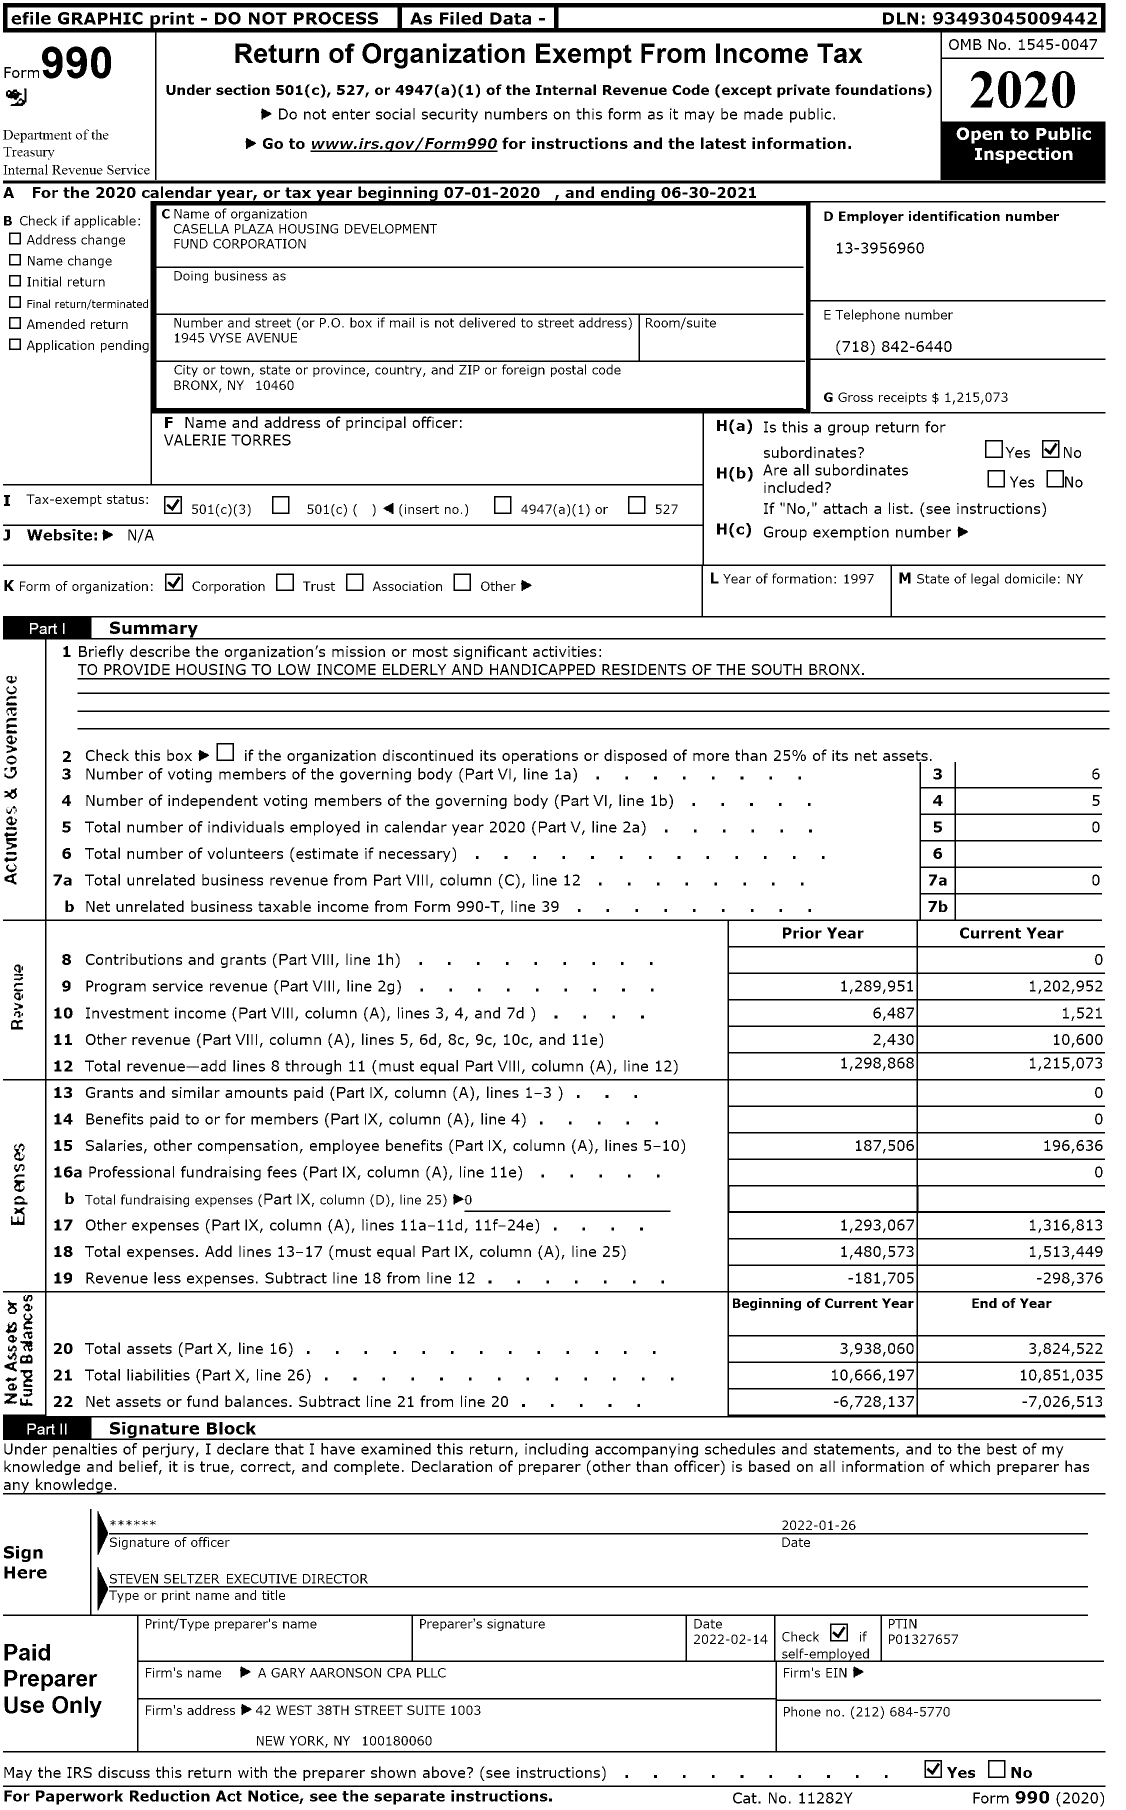 Image of first page of 2020 Form 990 for Casella Plaza Housing Development Fund Corporation